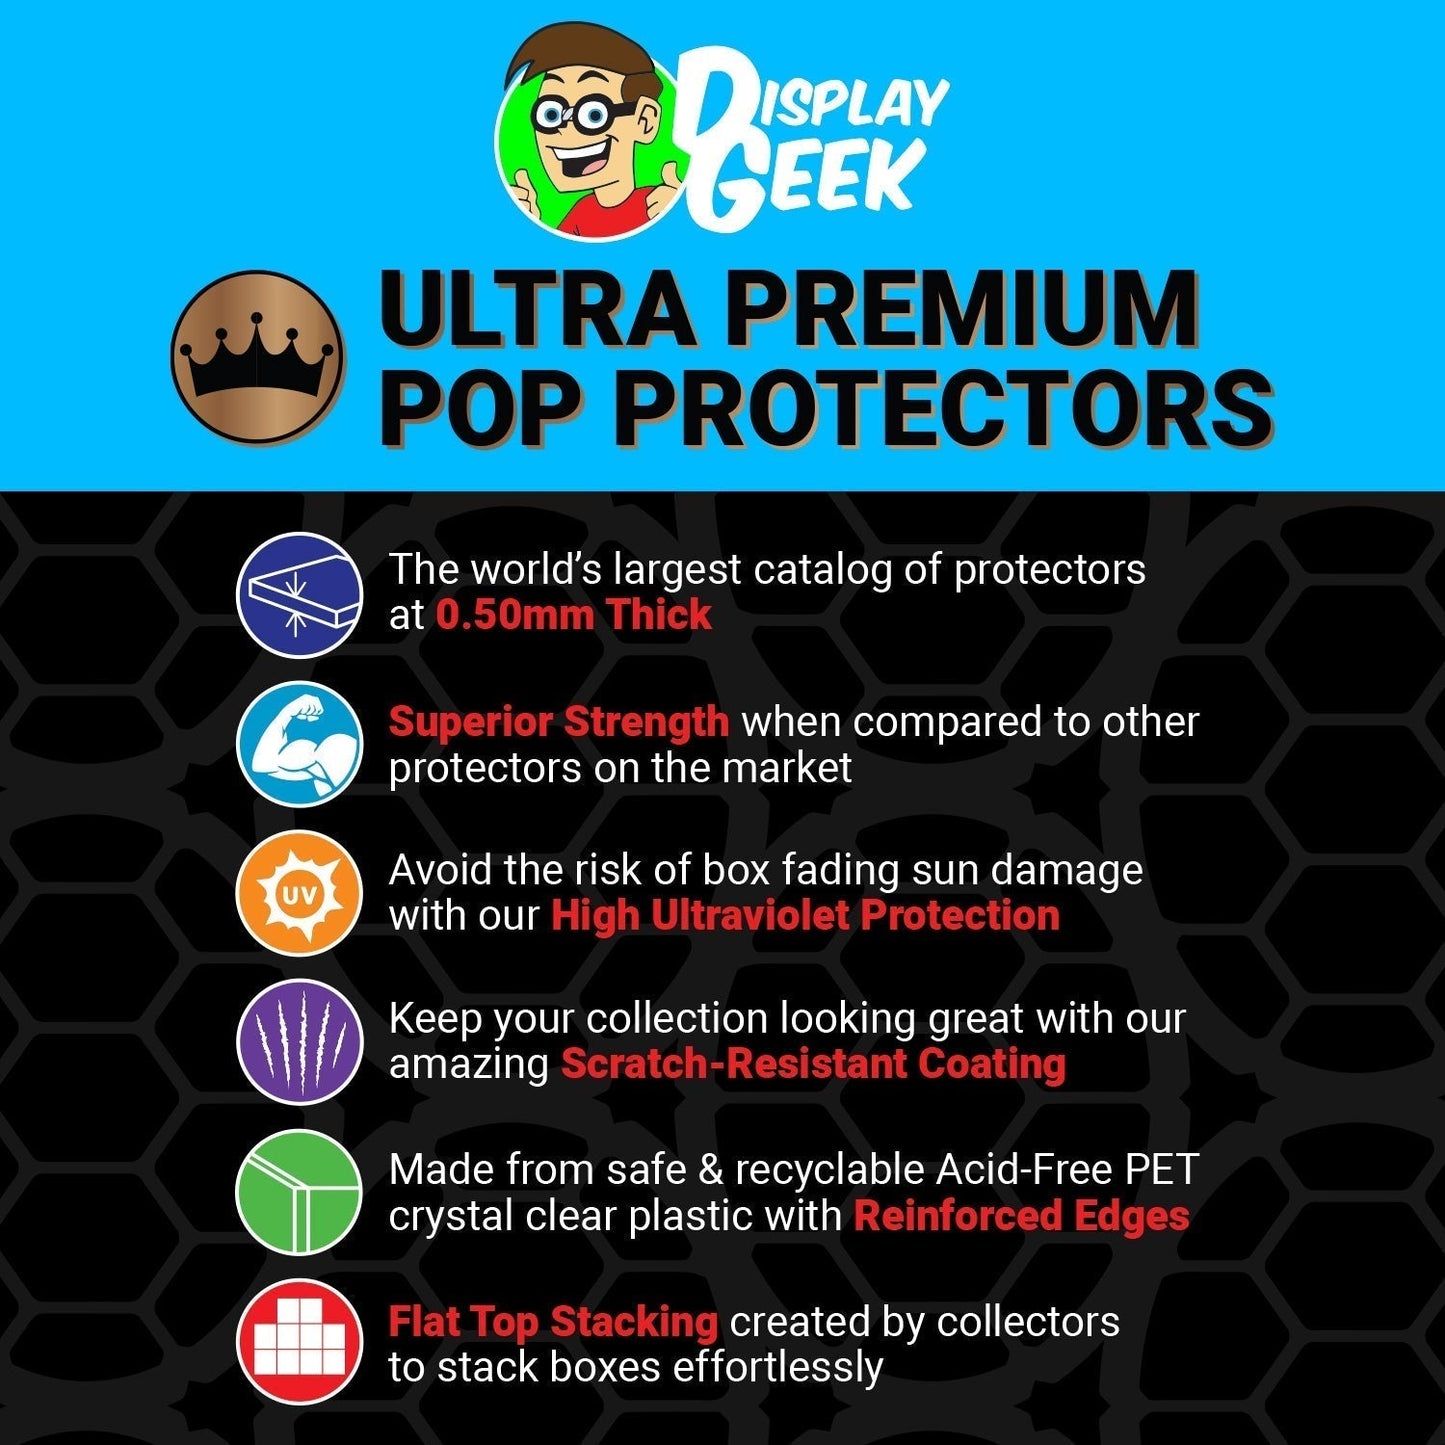 Pop Protector for Donald Duck on the Casey Jr. Circus Train Funko Pop Trains - PPG Pop Protector Guide Search Created by Display Geek